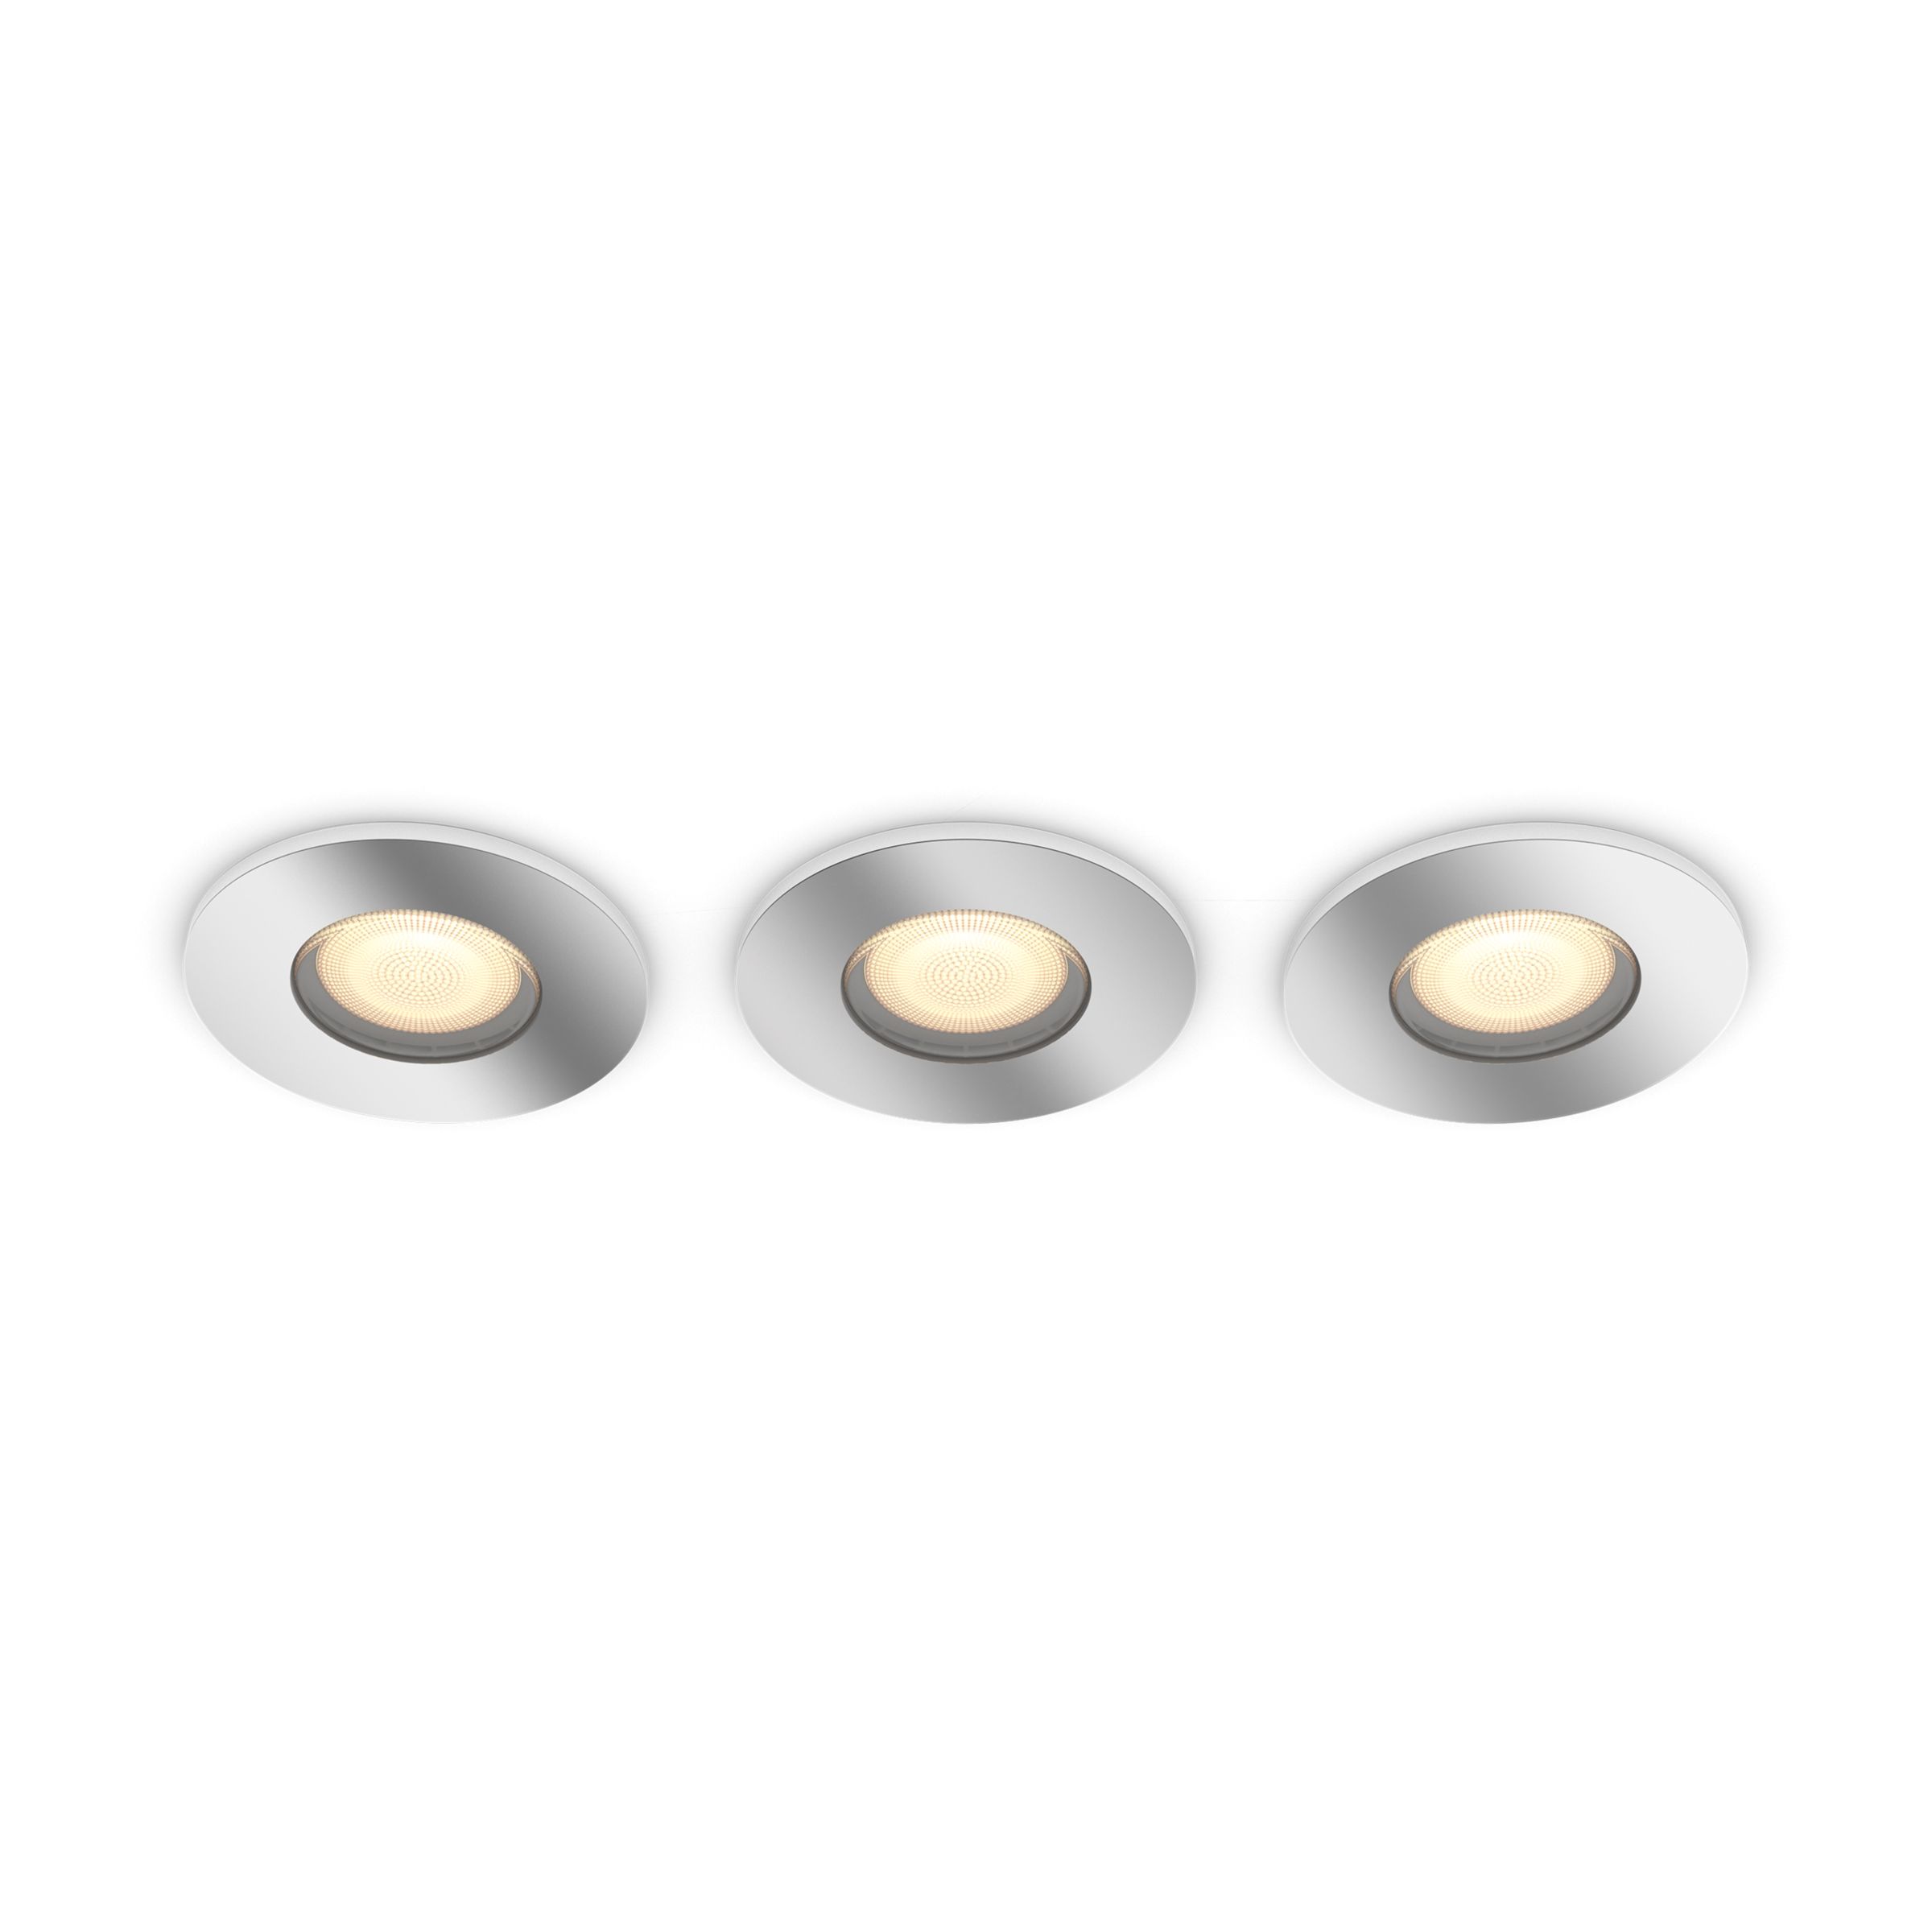 fox mistress service Hue White Ambiance Adore bathroom recessed downlight | Philips Hue UK